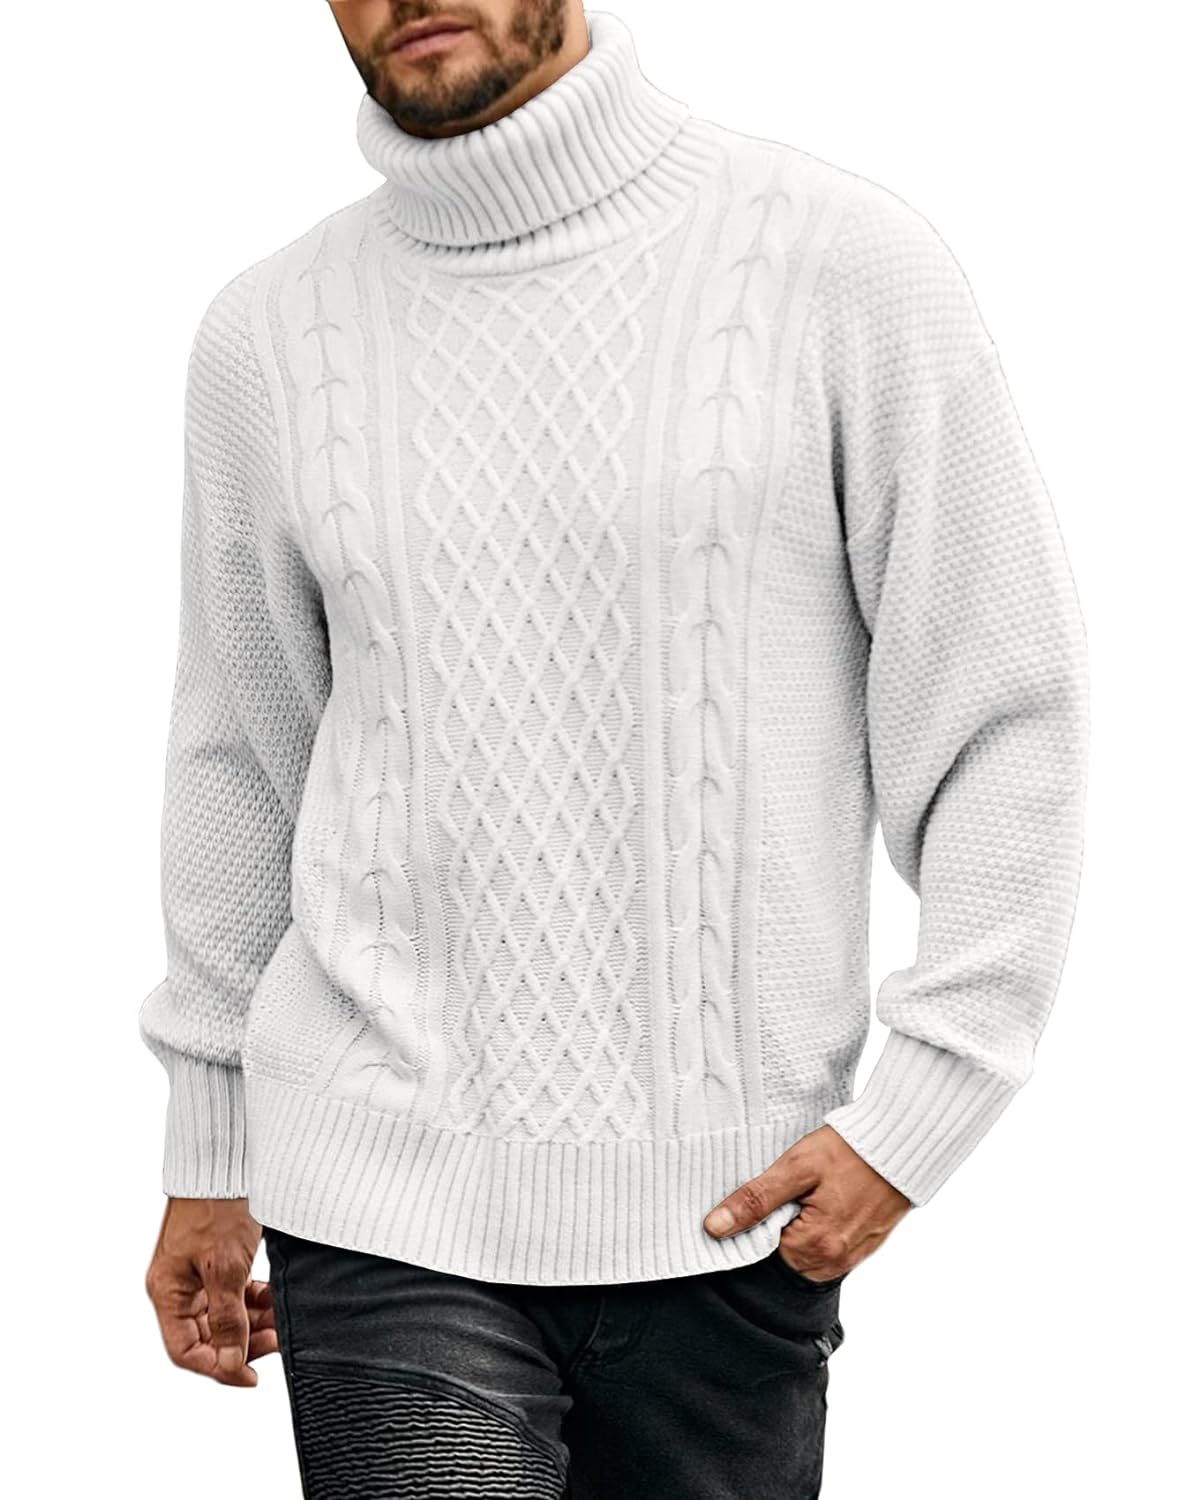 Angeun Mens Turtleneck Sweater Pullover Twisted Pattern Casual Loose Fit Thick Winter Long Sleeve Cable Knit Sweaters